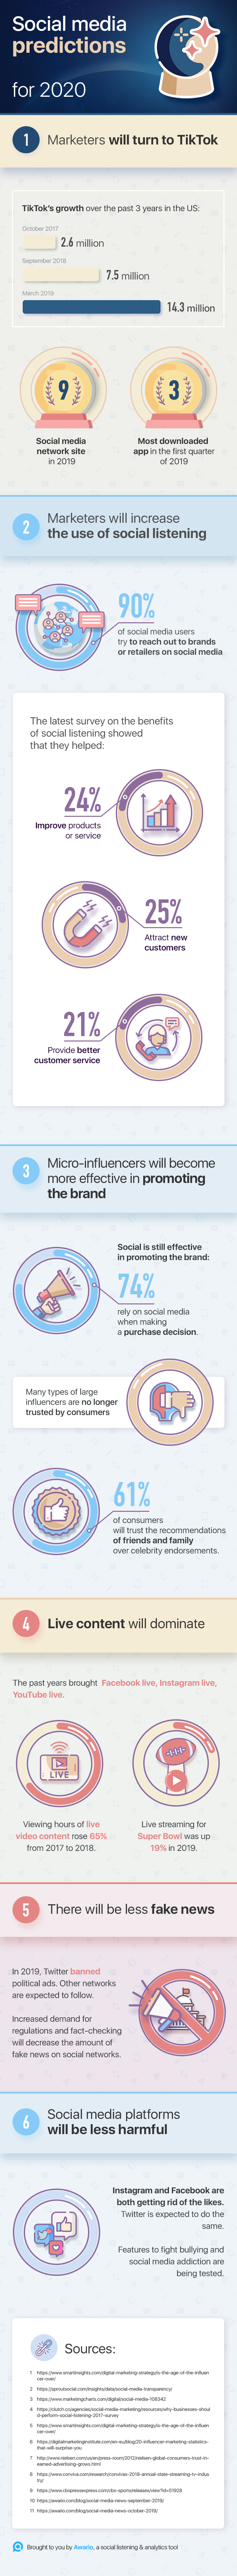 6 social media predictions for 2020 infographic